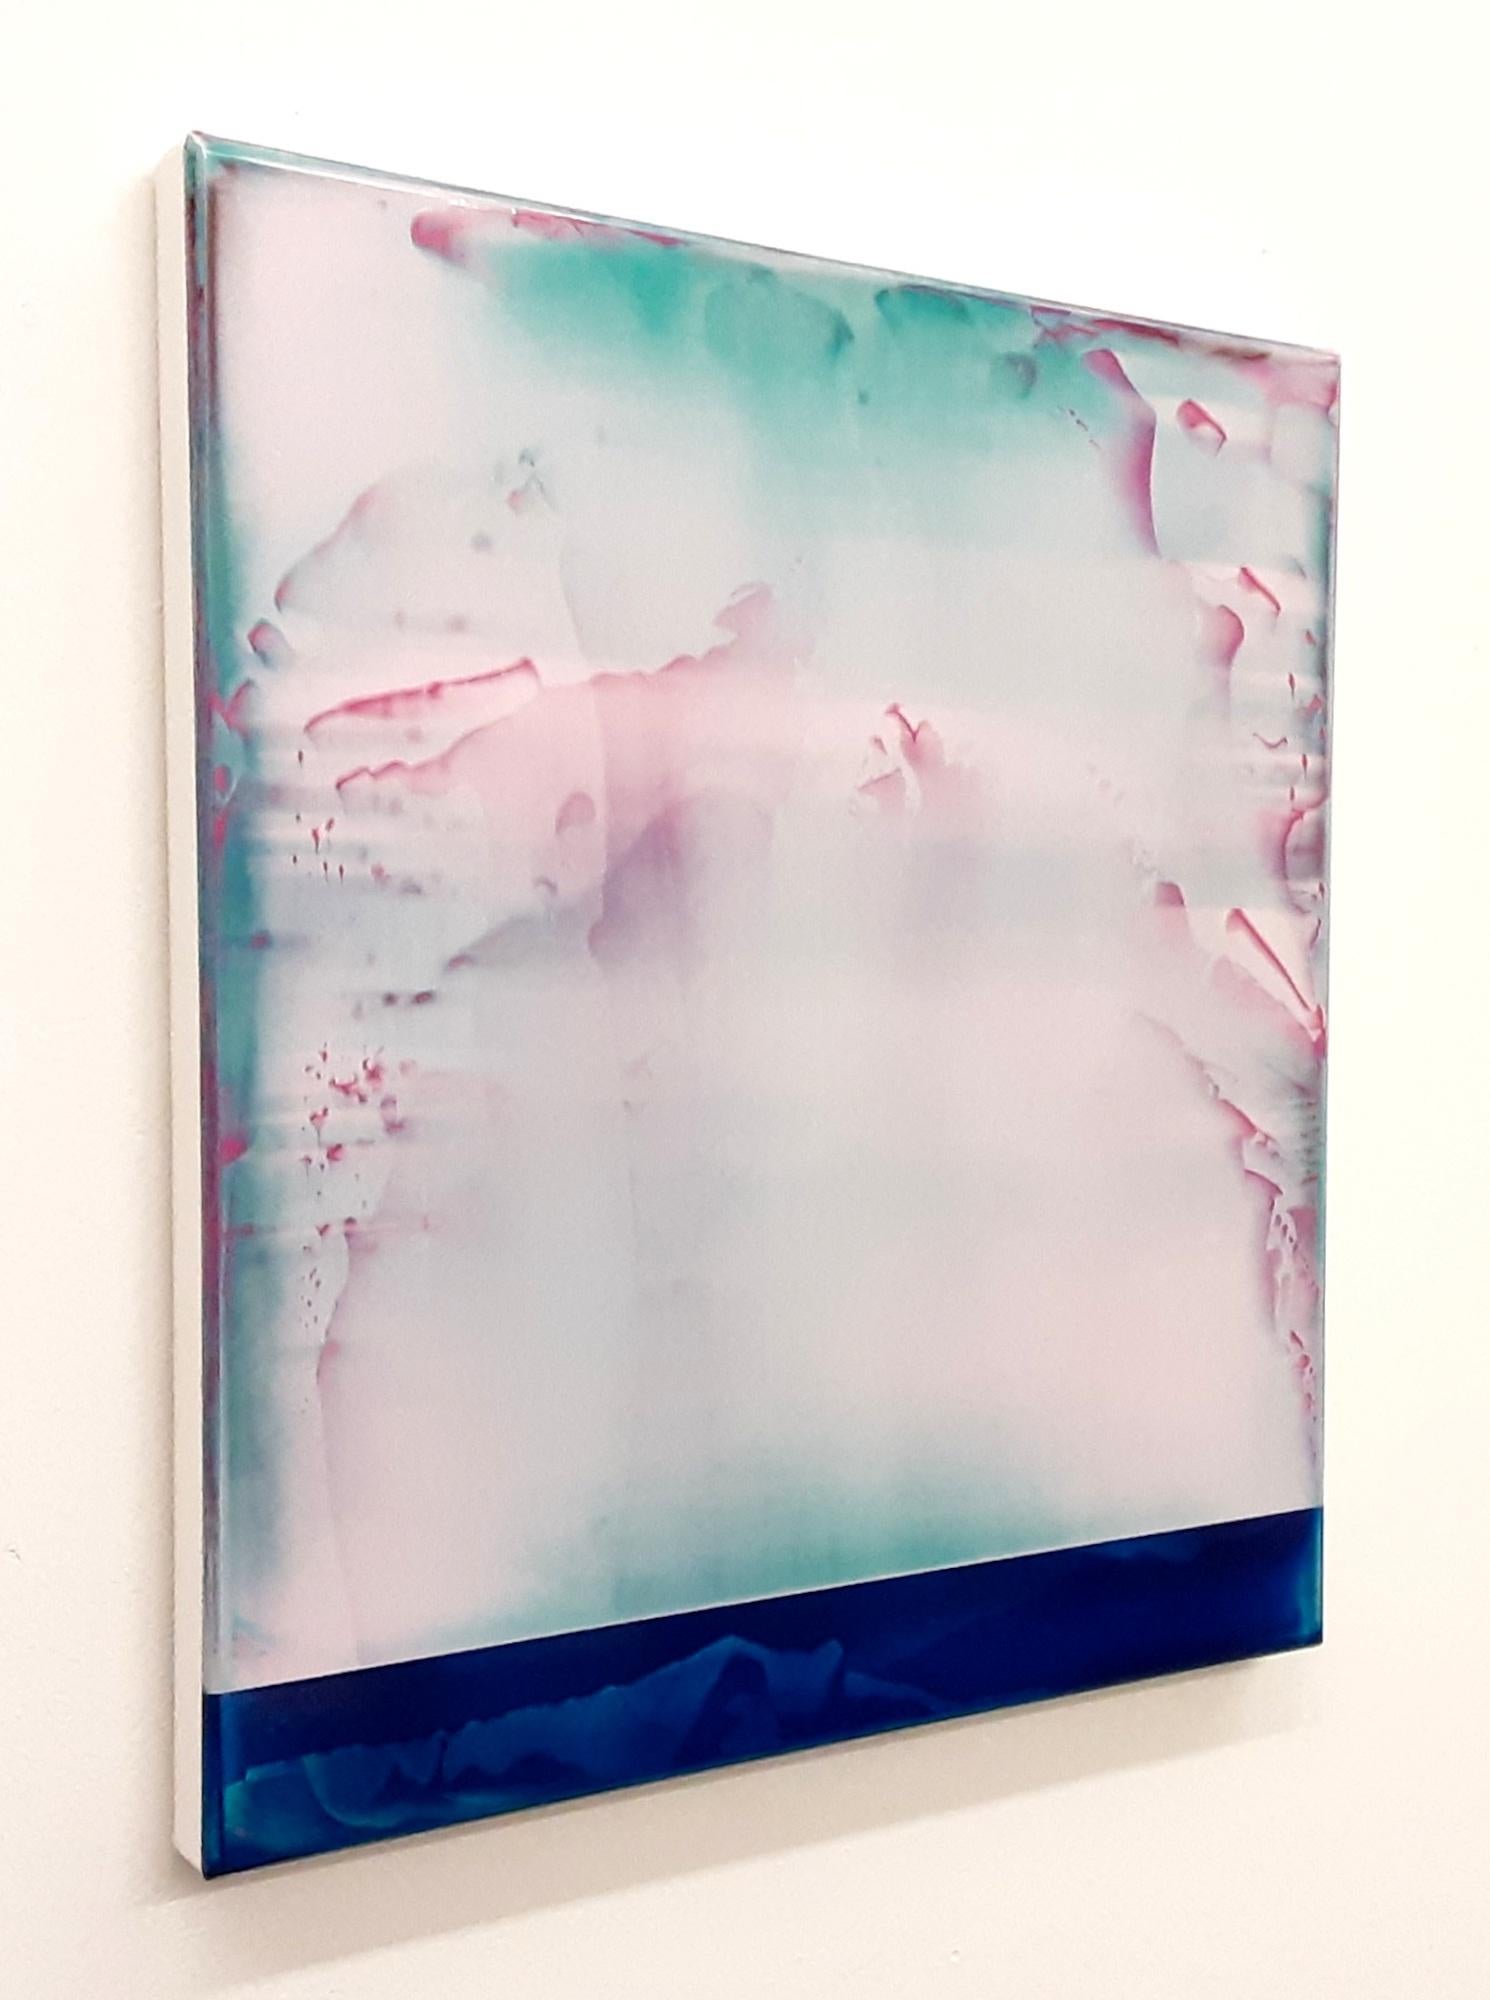 Lucent (2/19) by James Lumsden - Abstract colour painting, pink and light blue For Sale 3